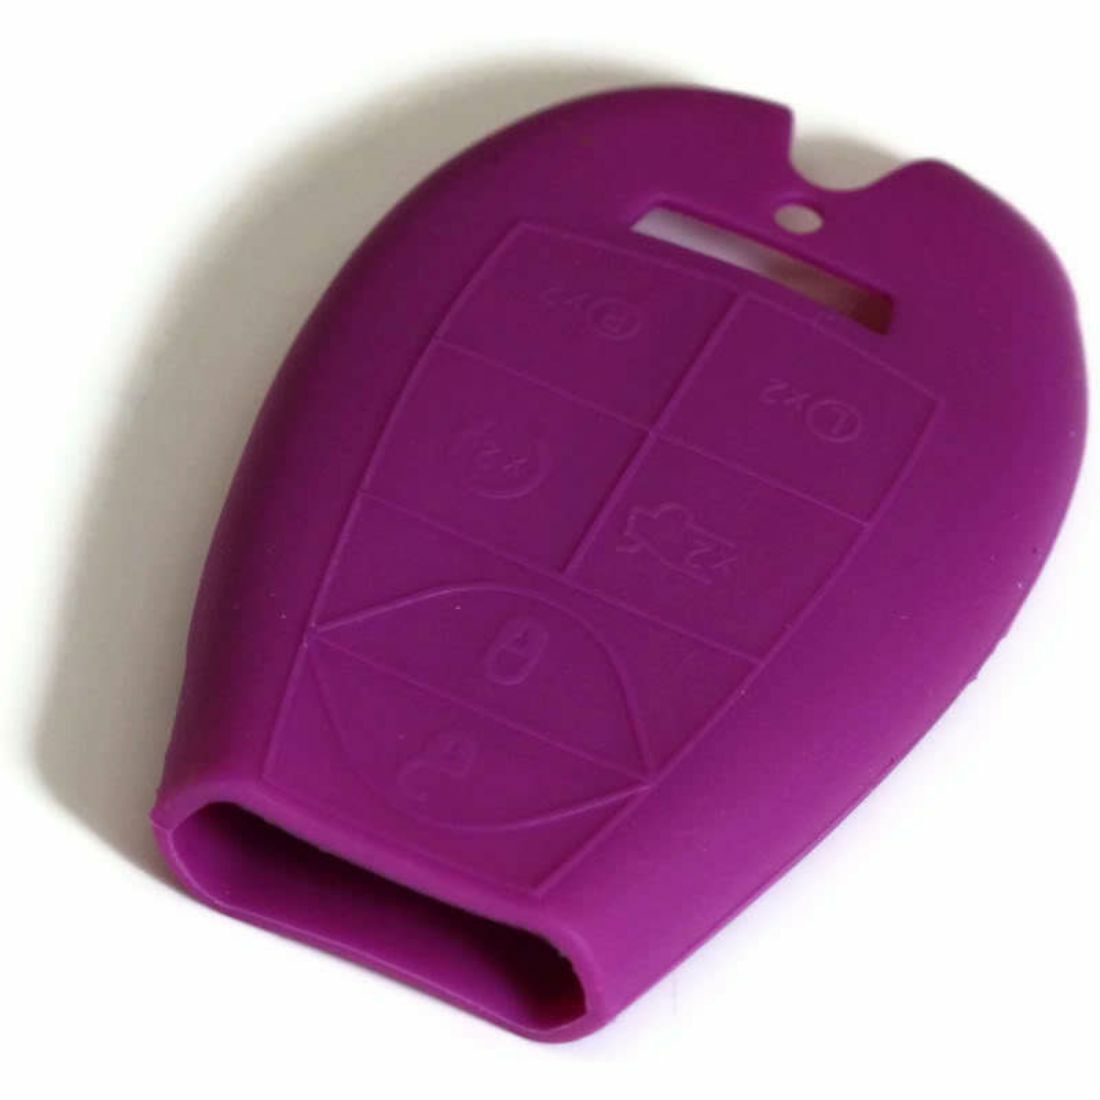 Purple Silicone Key Fob Cover for Dodge most models 3 Buttons - KFC.DDGA66.PUR